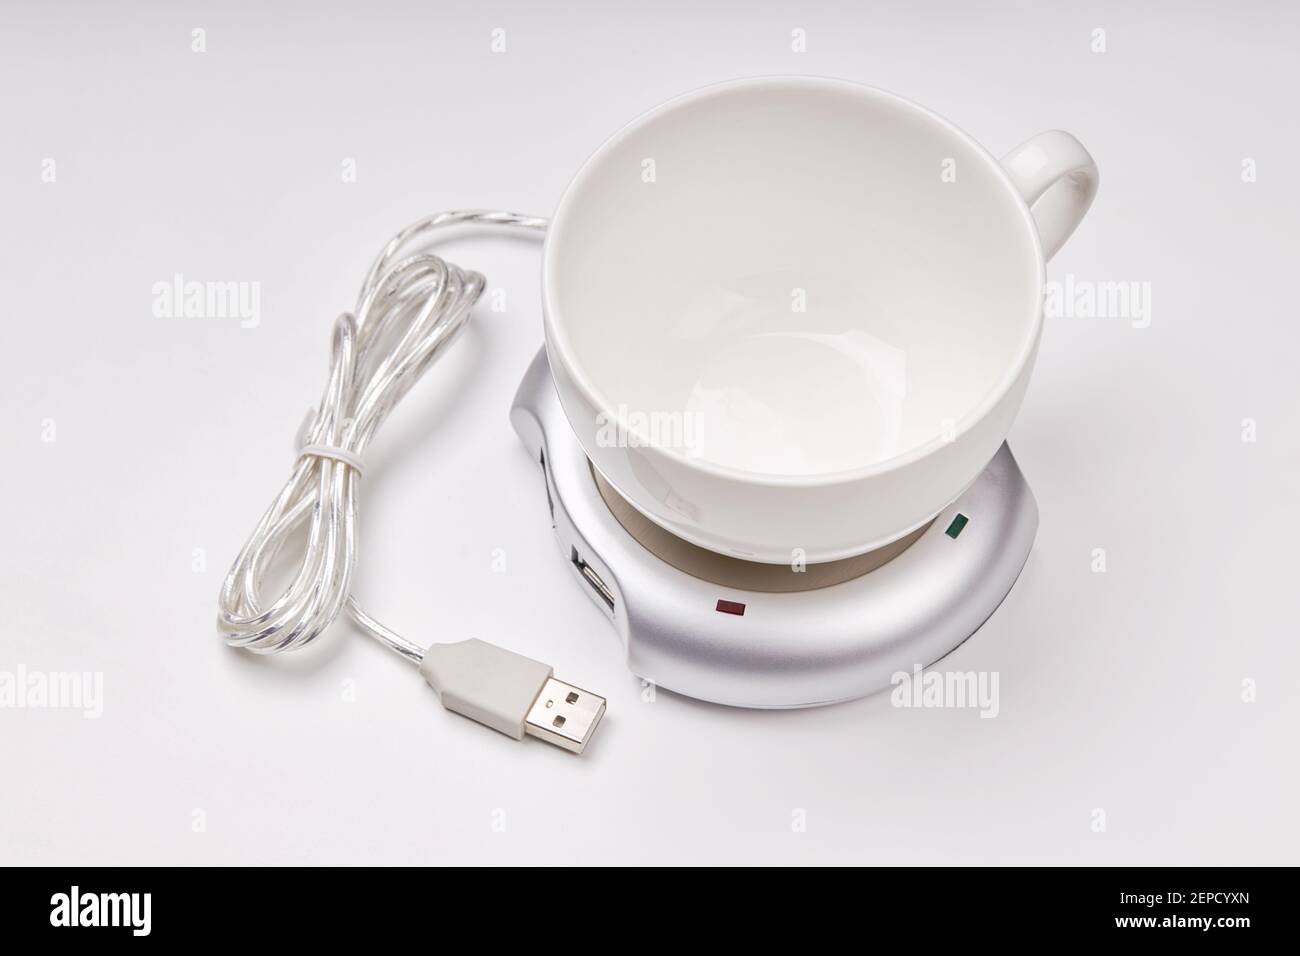 electronic usb hub and heater for cup coffee or tea at office. digital usb warmer device on grey background. Stock Photo